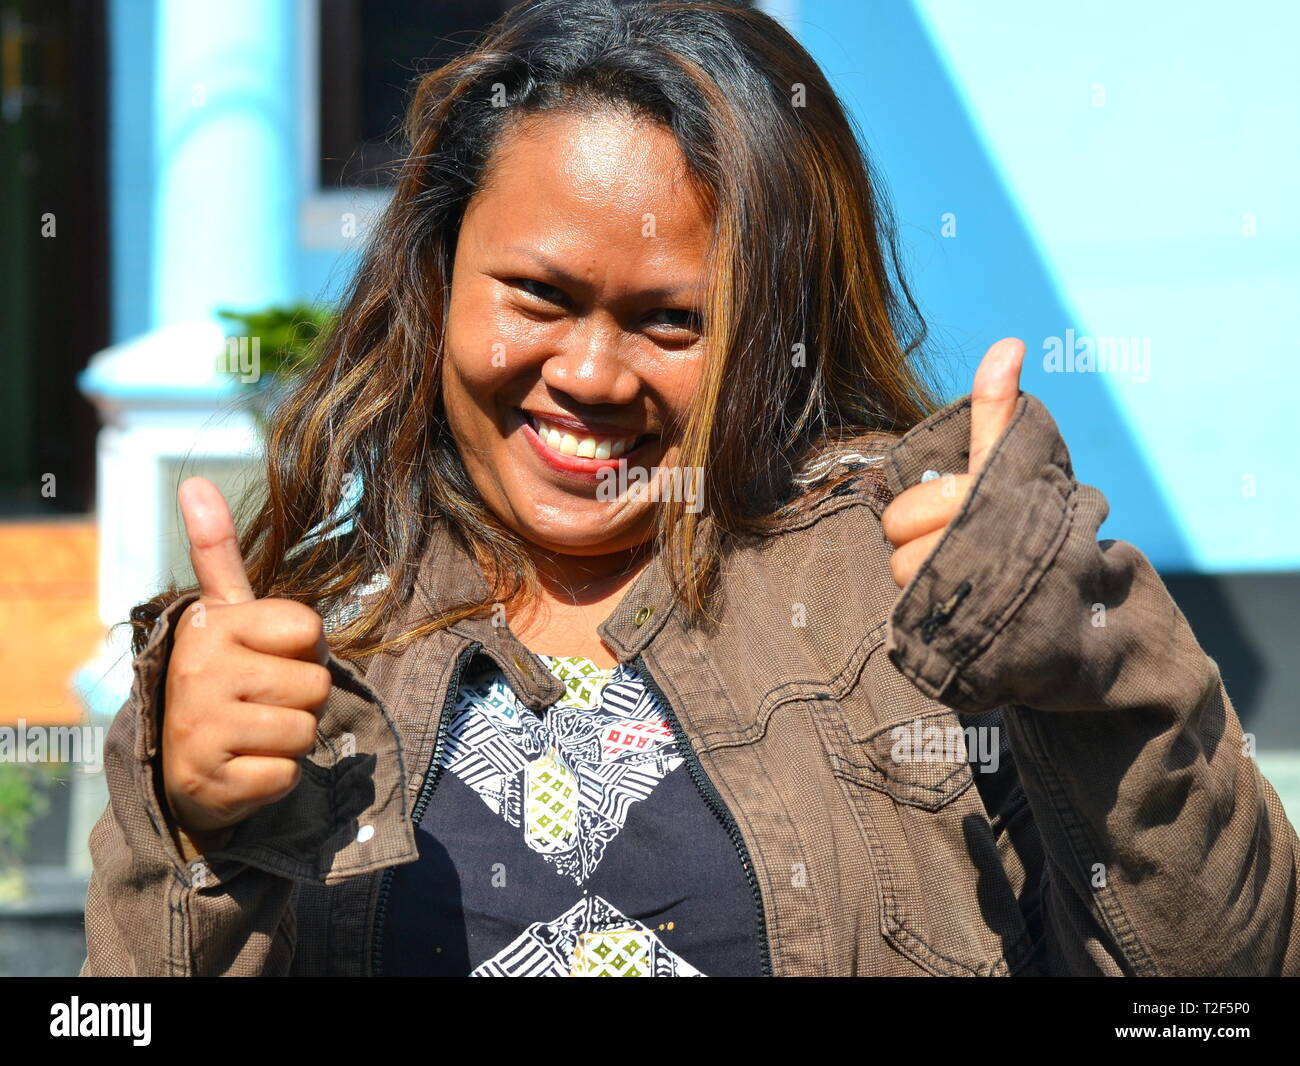 High-spirited young Indonesian woman gives two thumbs up. Stock Photo